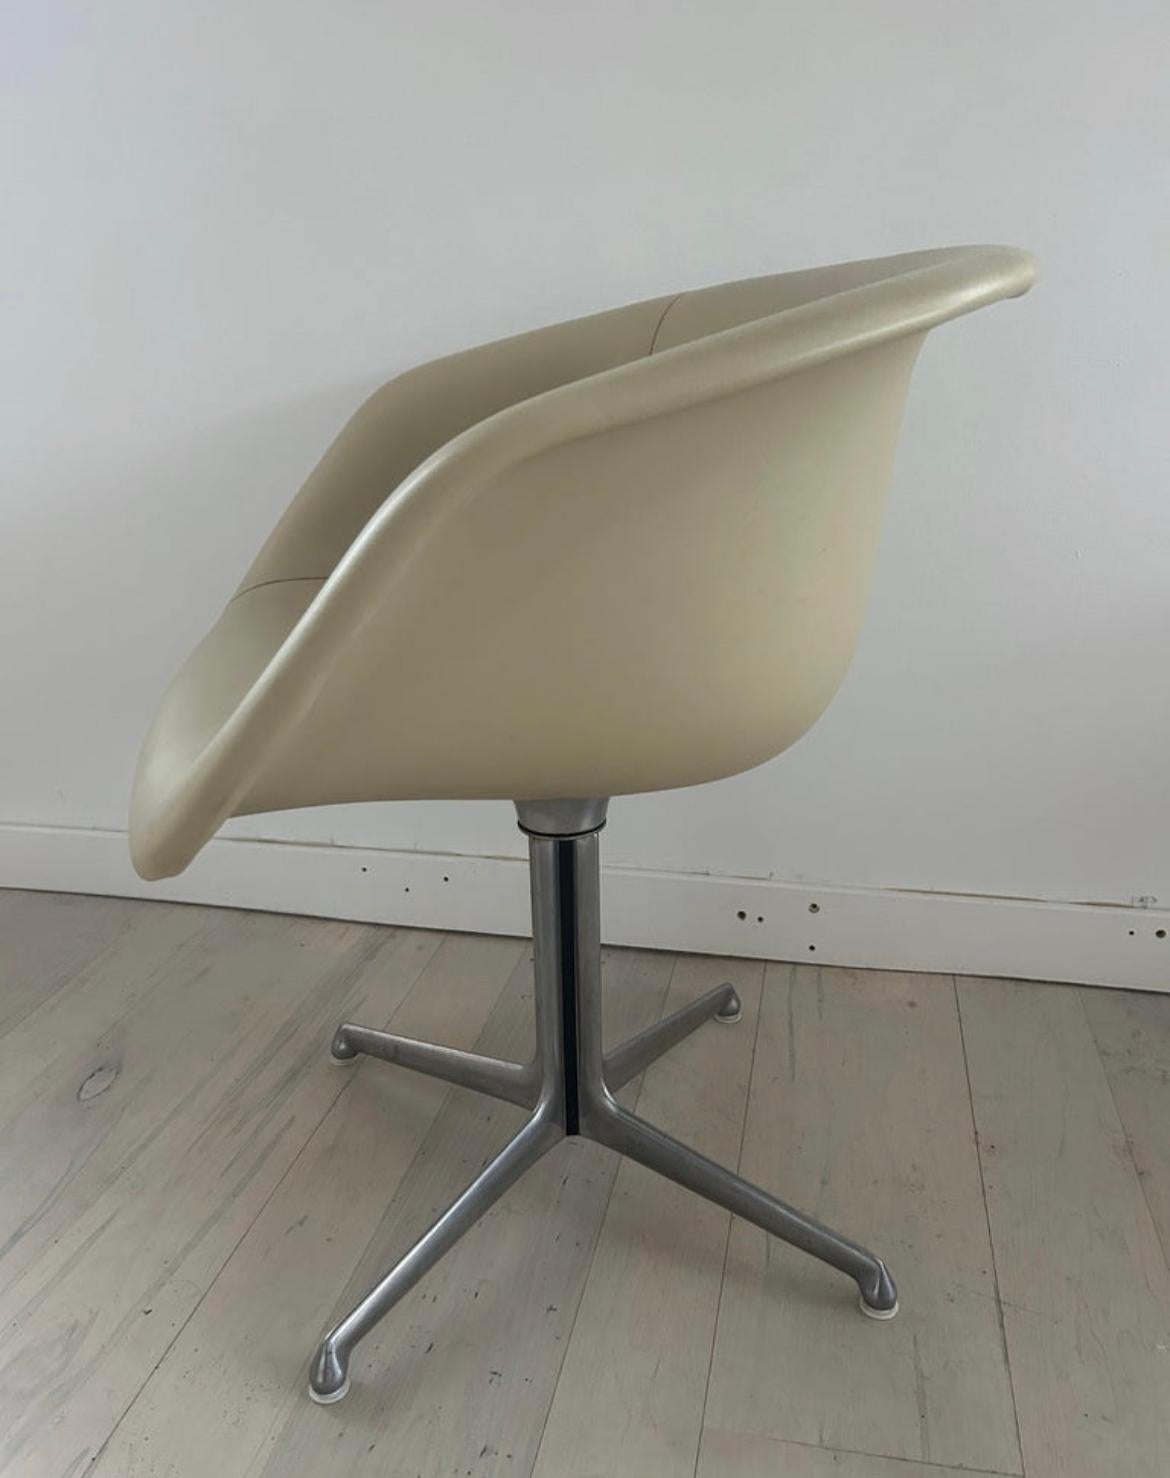 Mid-Century Modern Low Shell Dining chairs. Very clean low fiberglass shell Home or Office chairs with tan Naugahyde upholstery and sit on Aluminum swivel bases. Very Clean and sturdy all chairs are Matching in color and condition. Bases have all